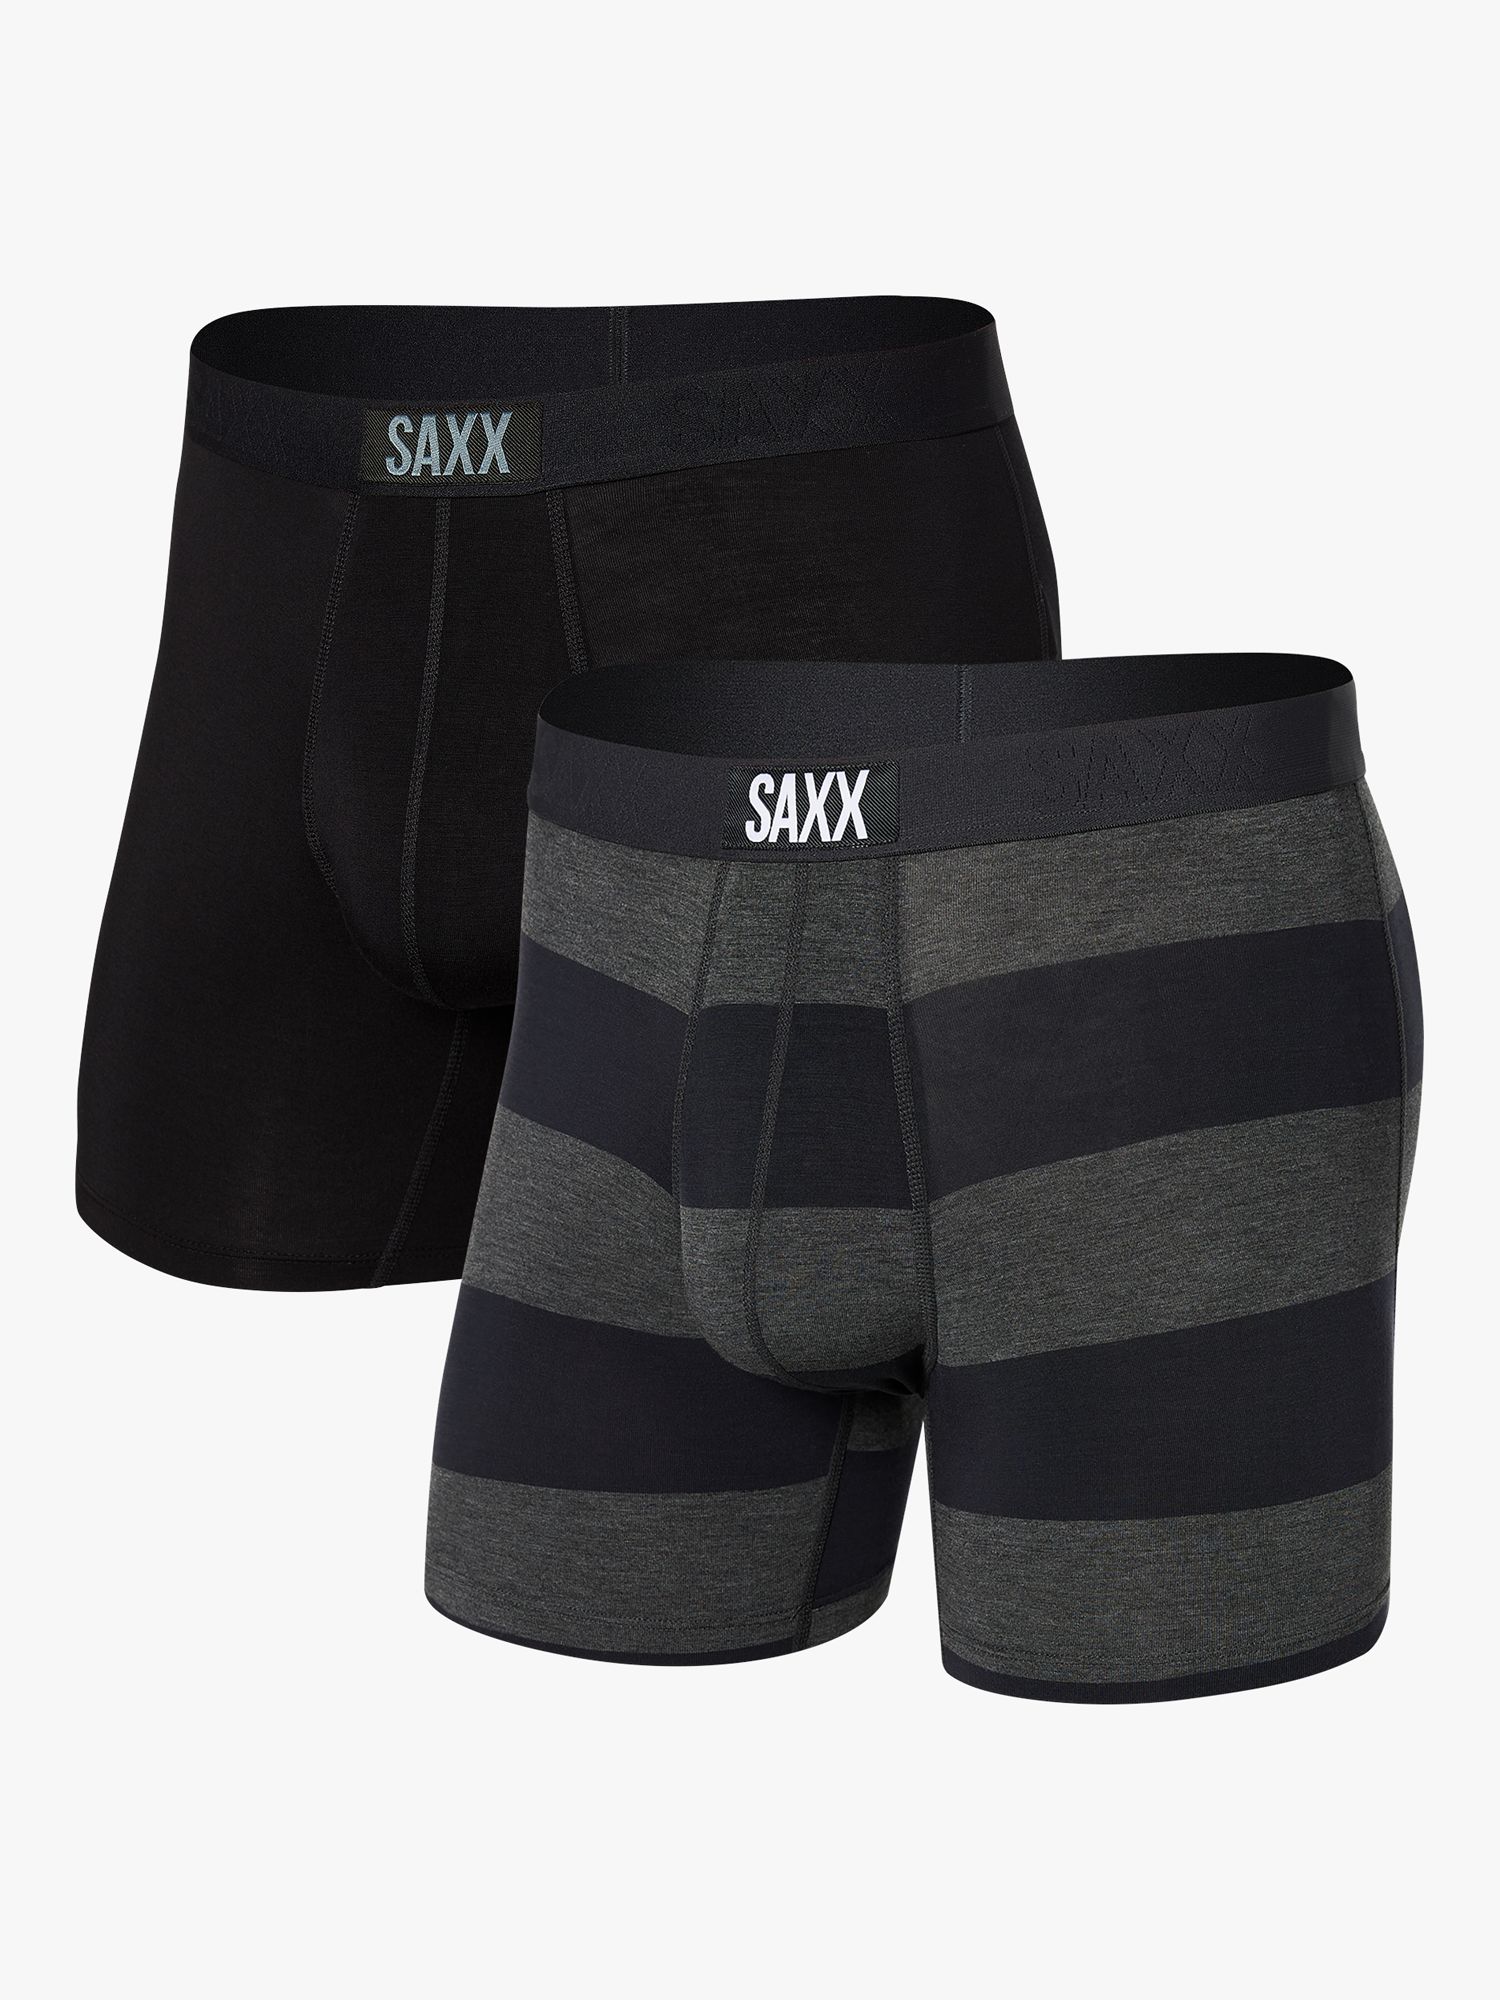 SAXX Rugby Stripe Trunks, Pack of 2, Black, M